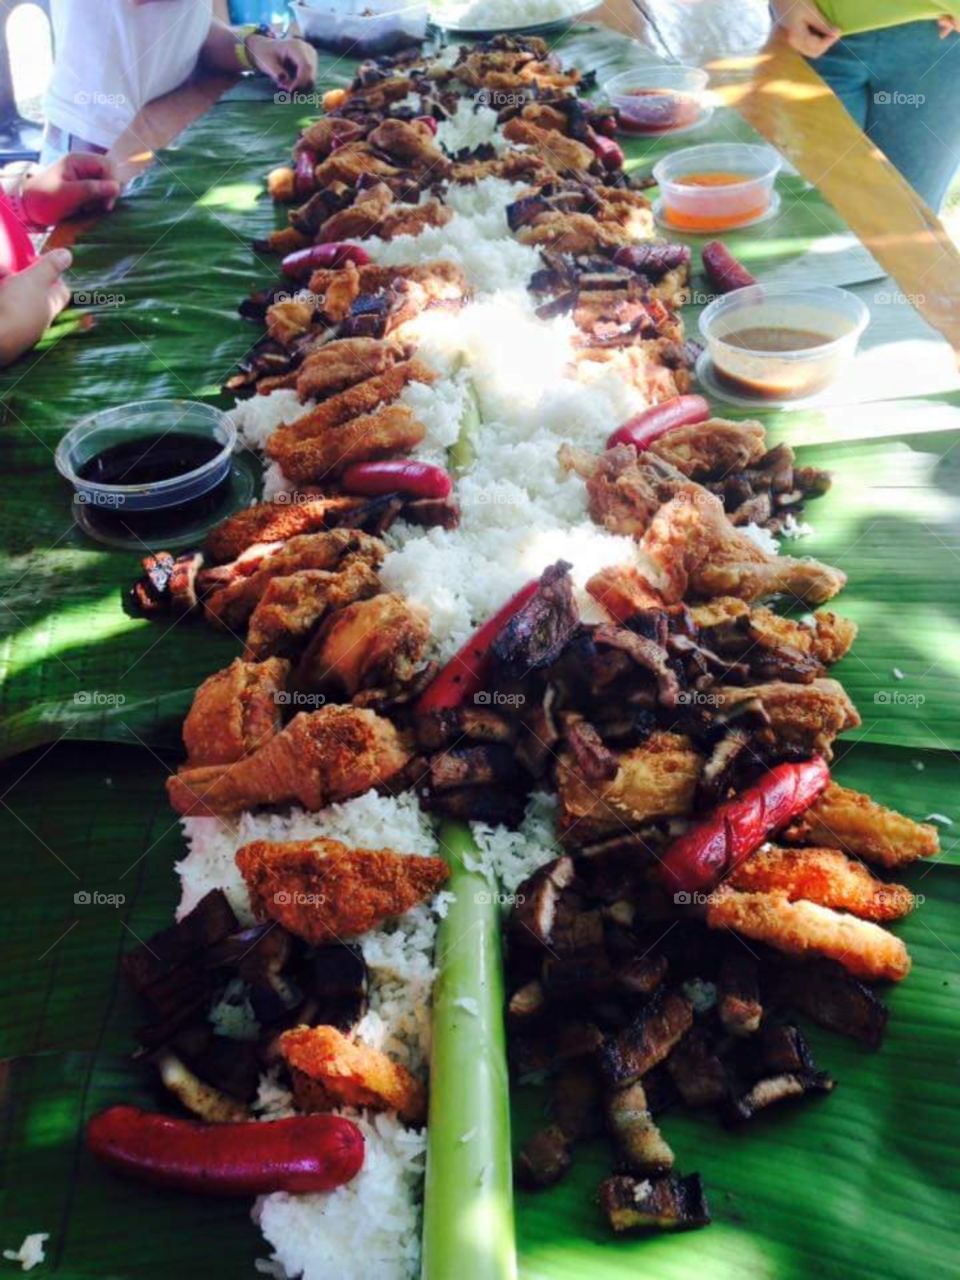 boodle fight

a typical group feast